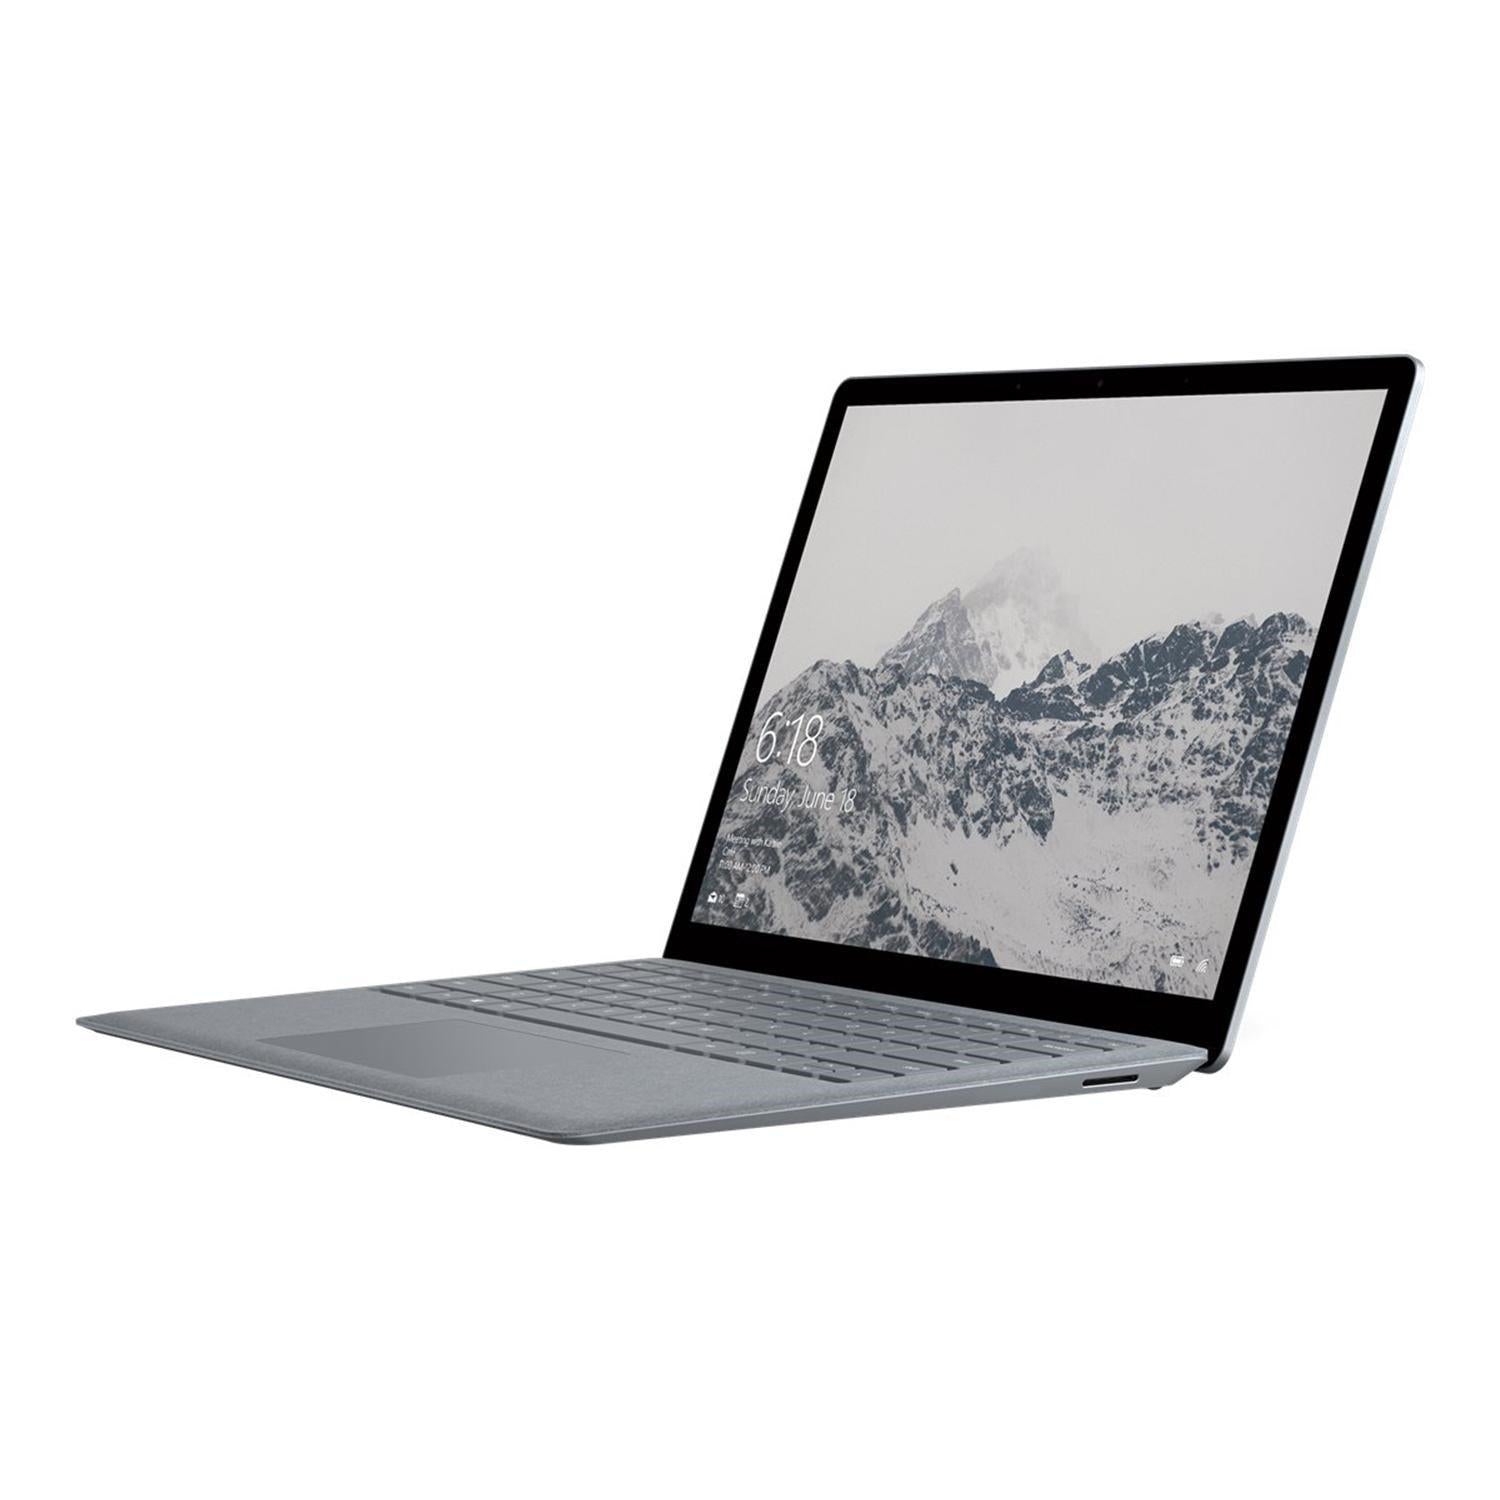 Microsoft Surface Laptop 3, Intel Core i5, 8GB RAM, 128GB SSD, 13", Silver - Refurbished Excellent